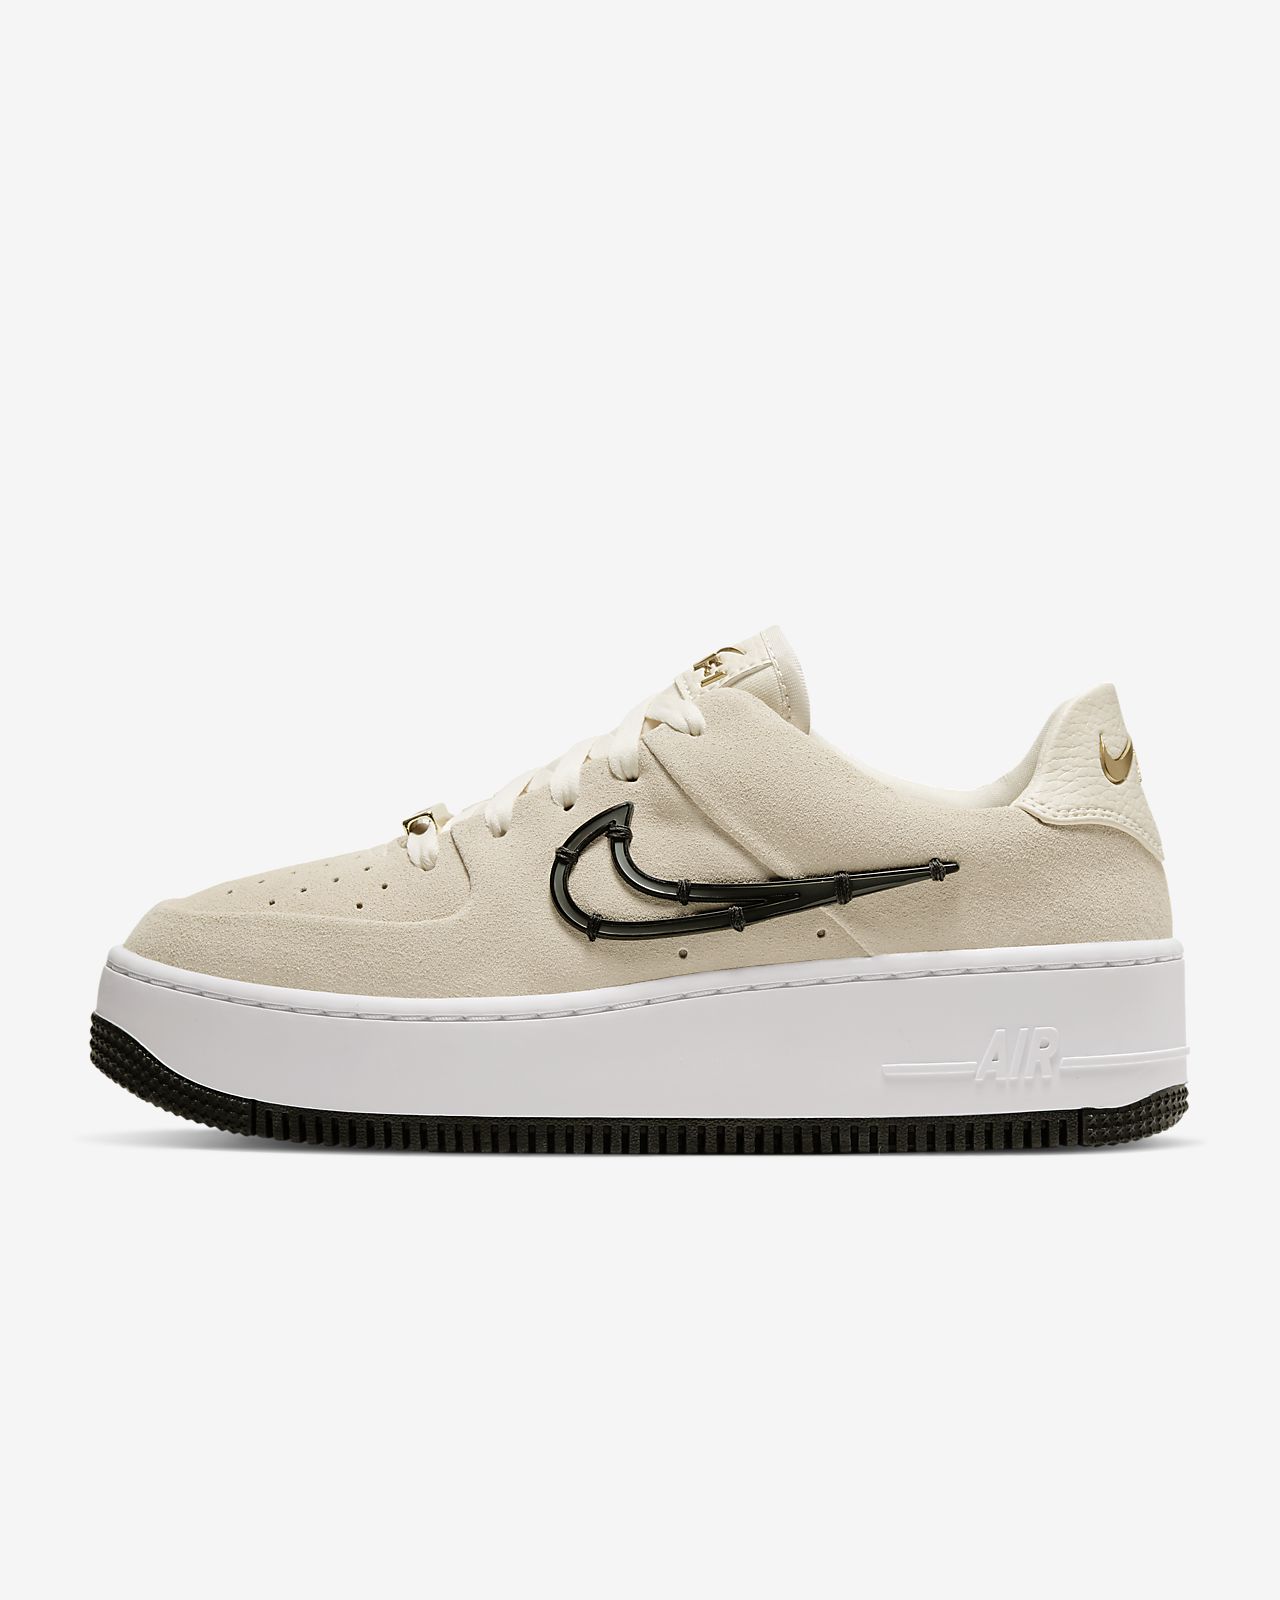 cream color air force ones